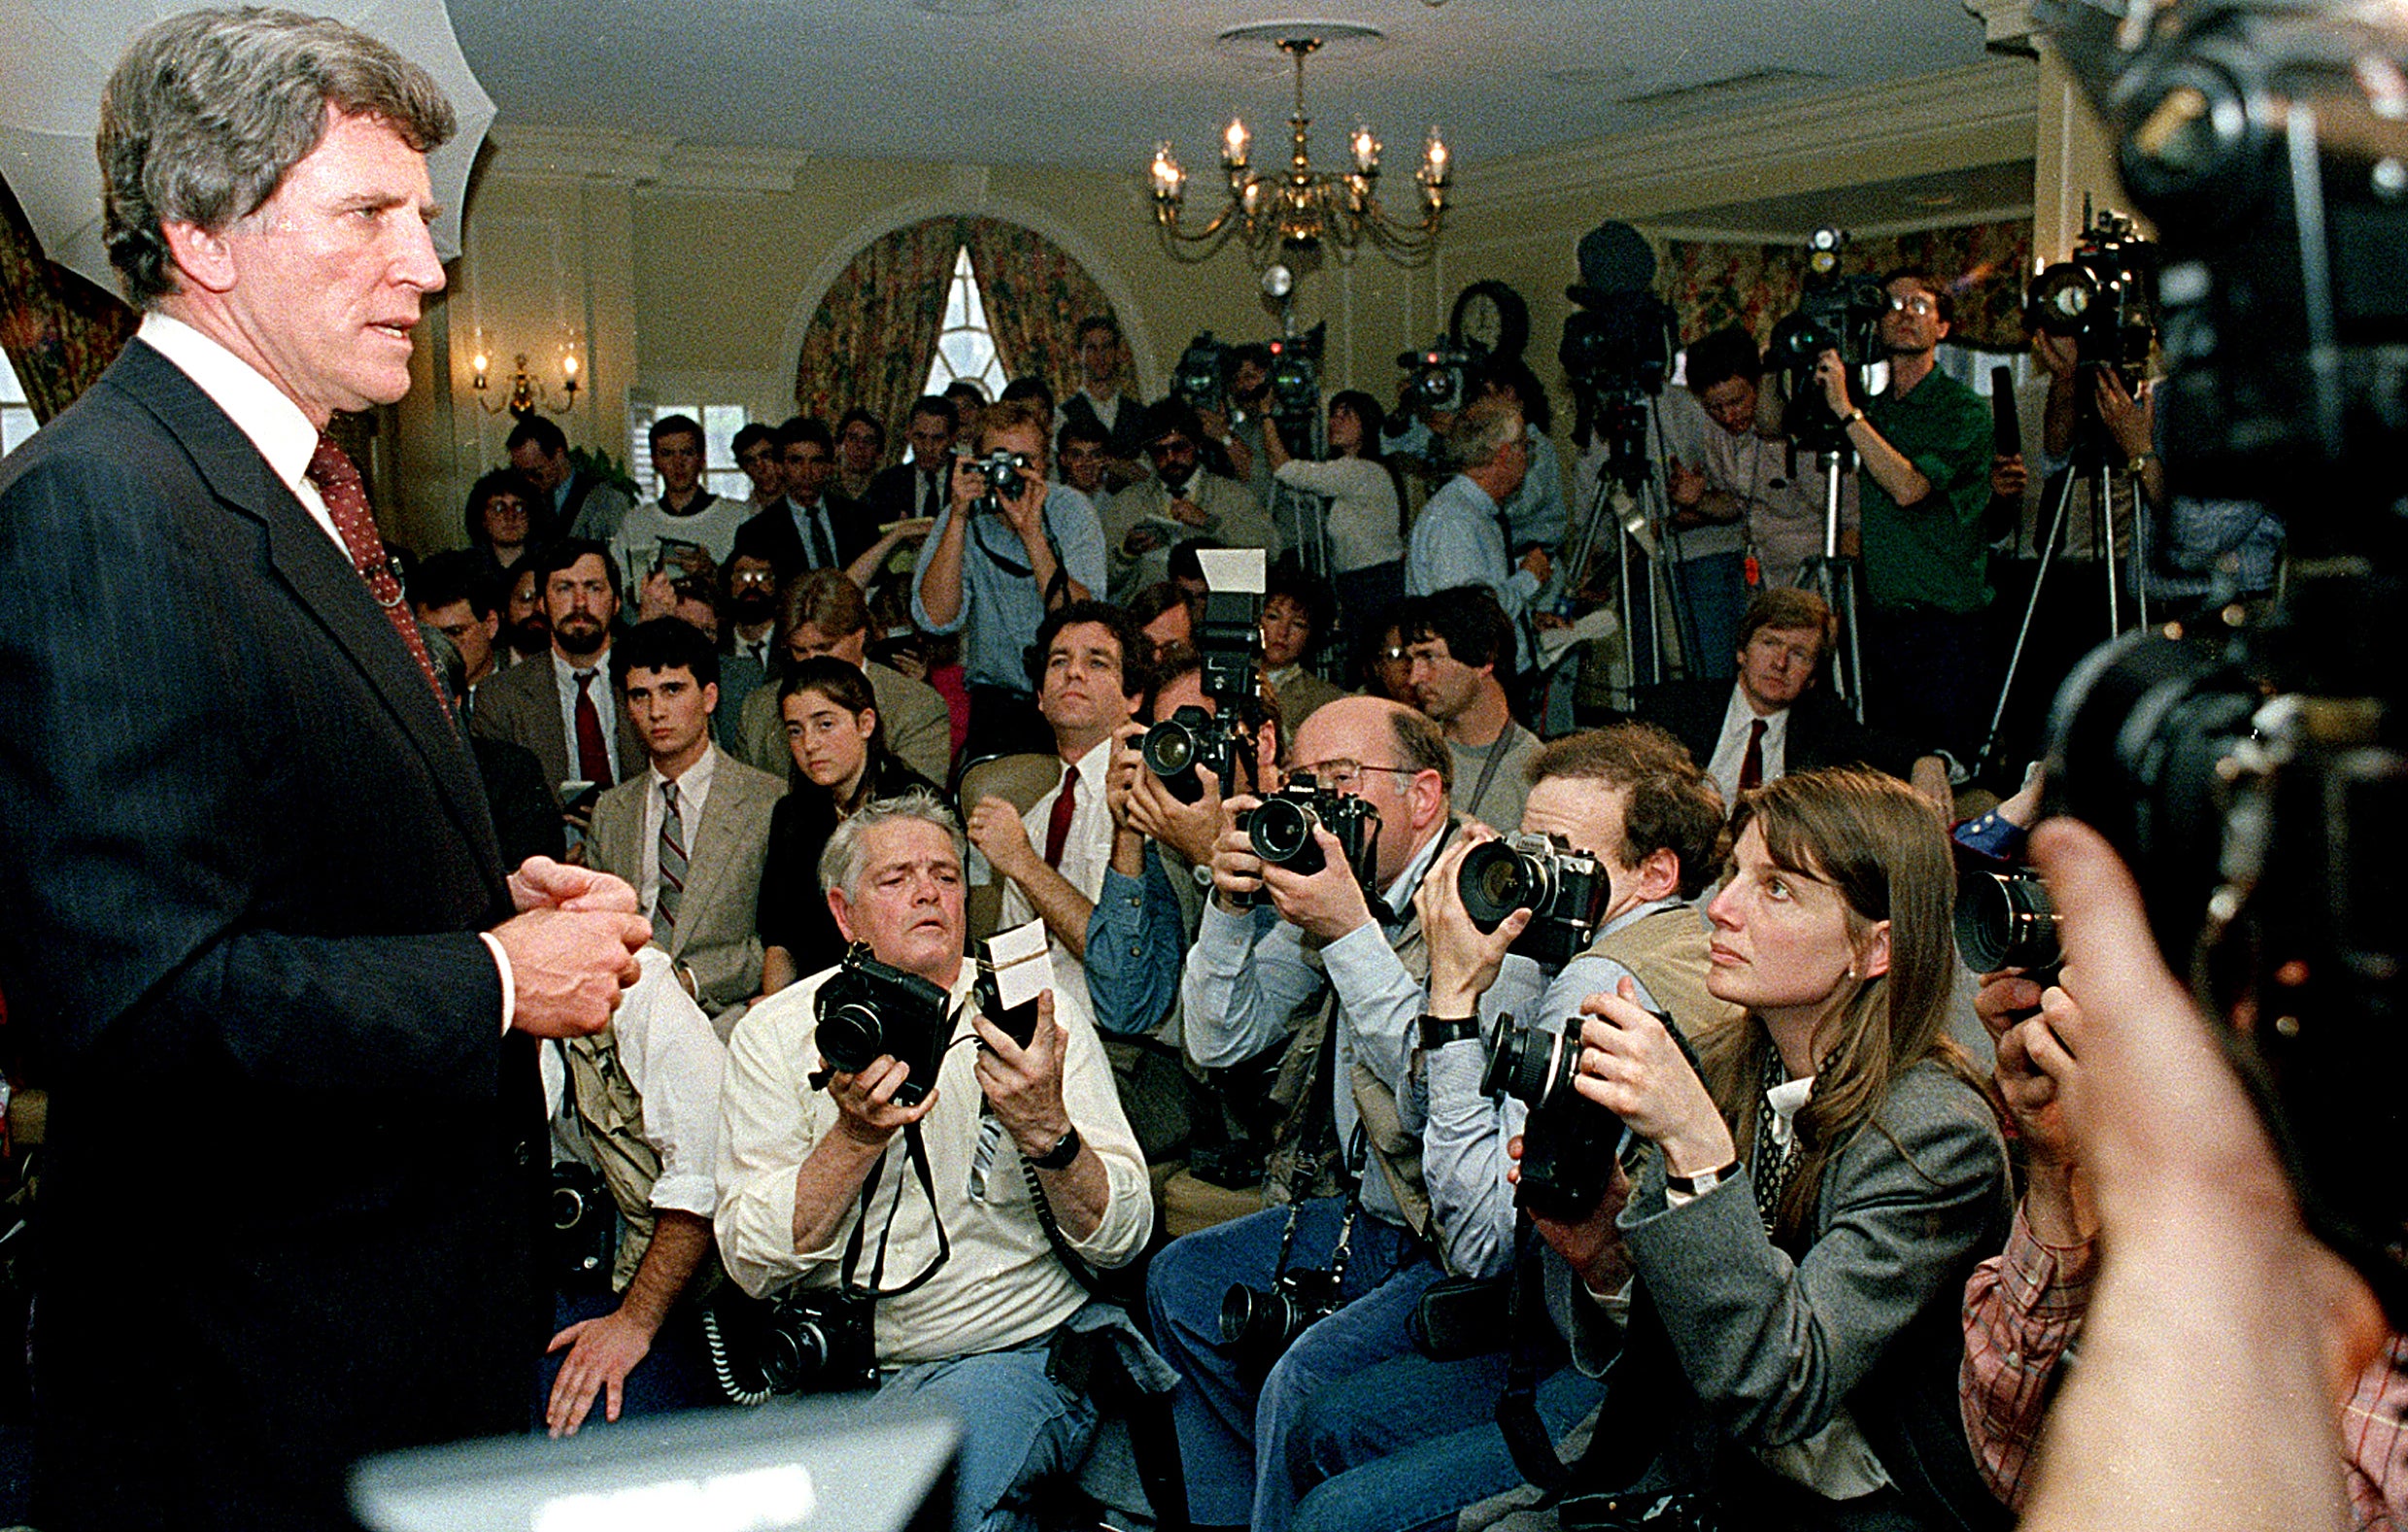  Presidential candidate Gary Hart faces questions about his relationship with Donna Rice in 1987. (AP photo/Jim Cole) 